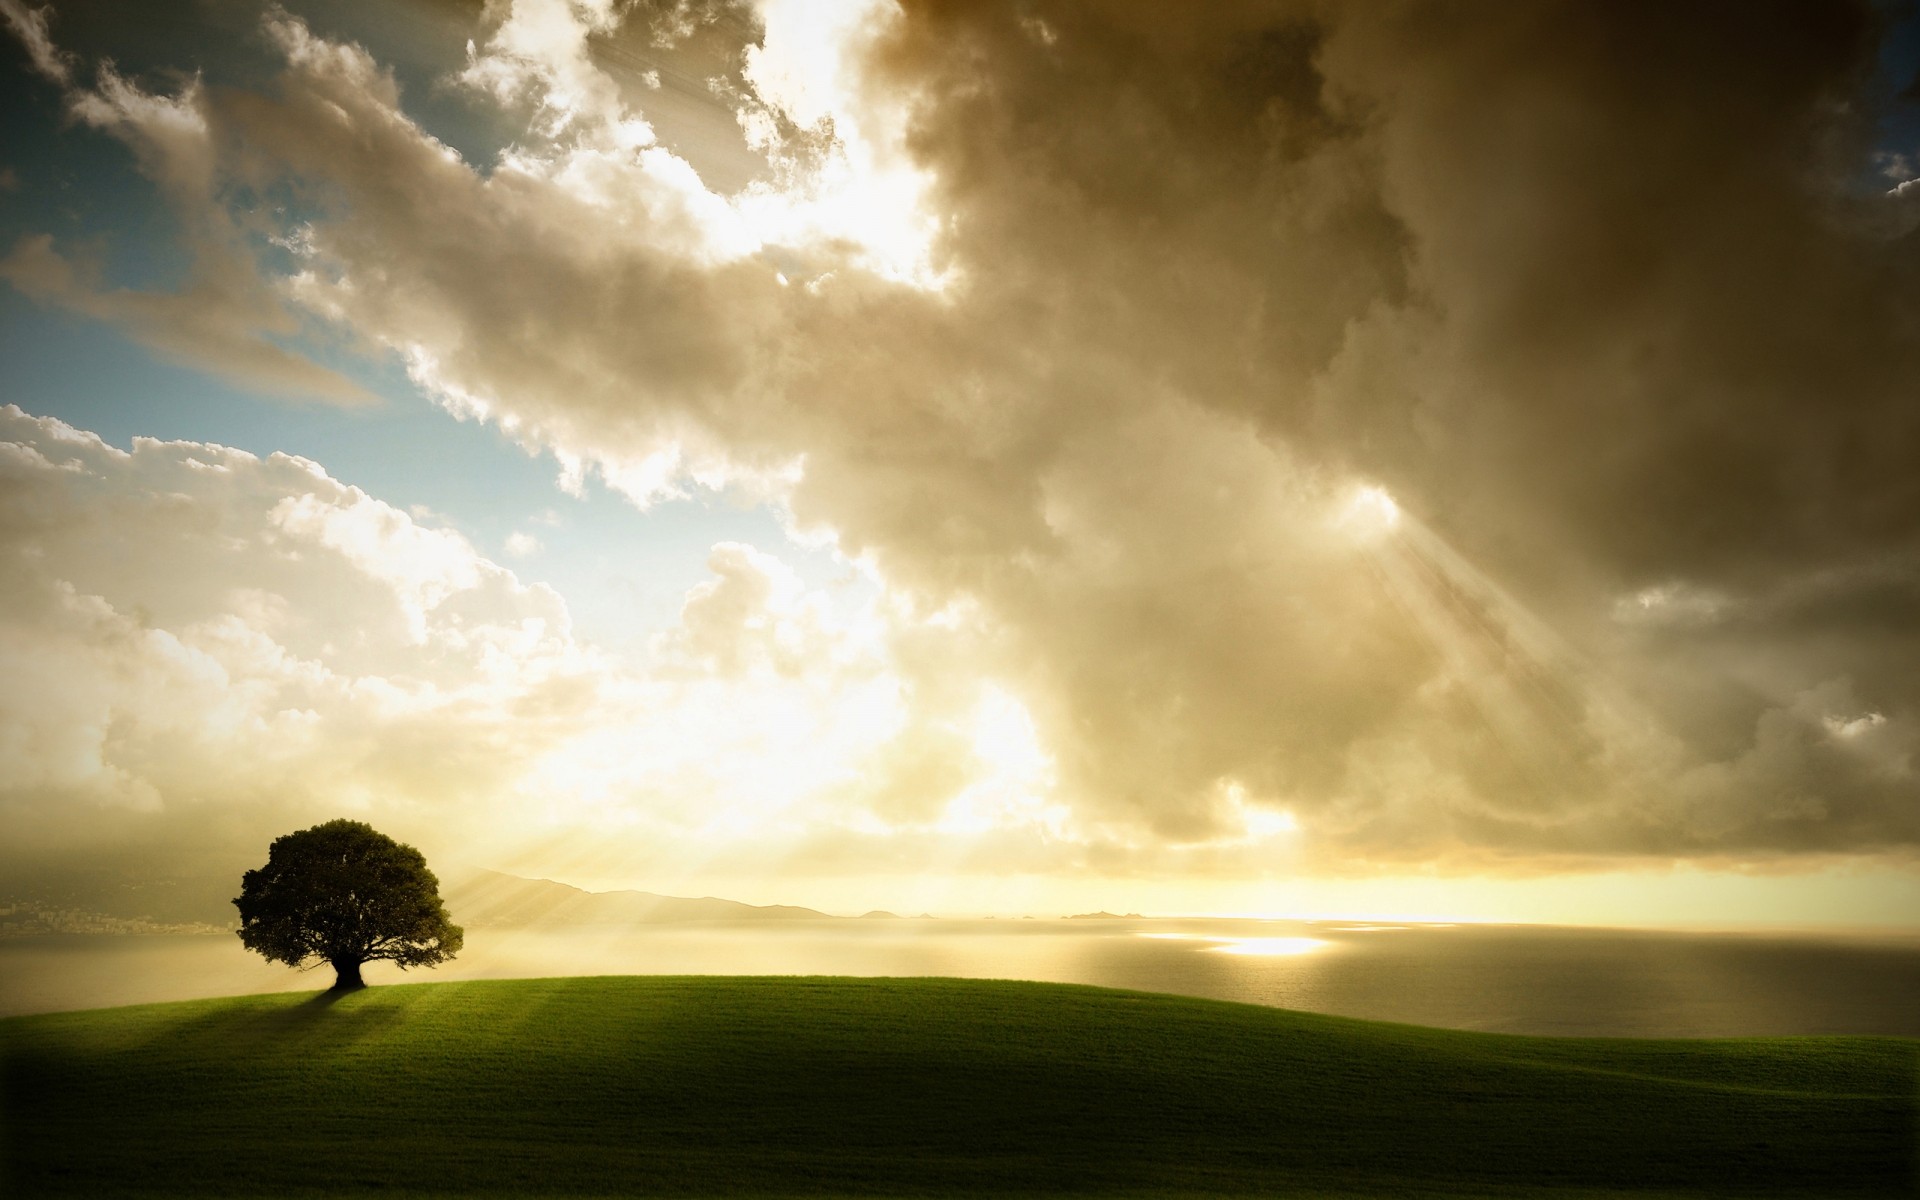 landscapes sunset sky sun landscape dawn nature fair weather grass storm outdoors countryside weather rural cloud summer evening dramatic trees field